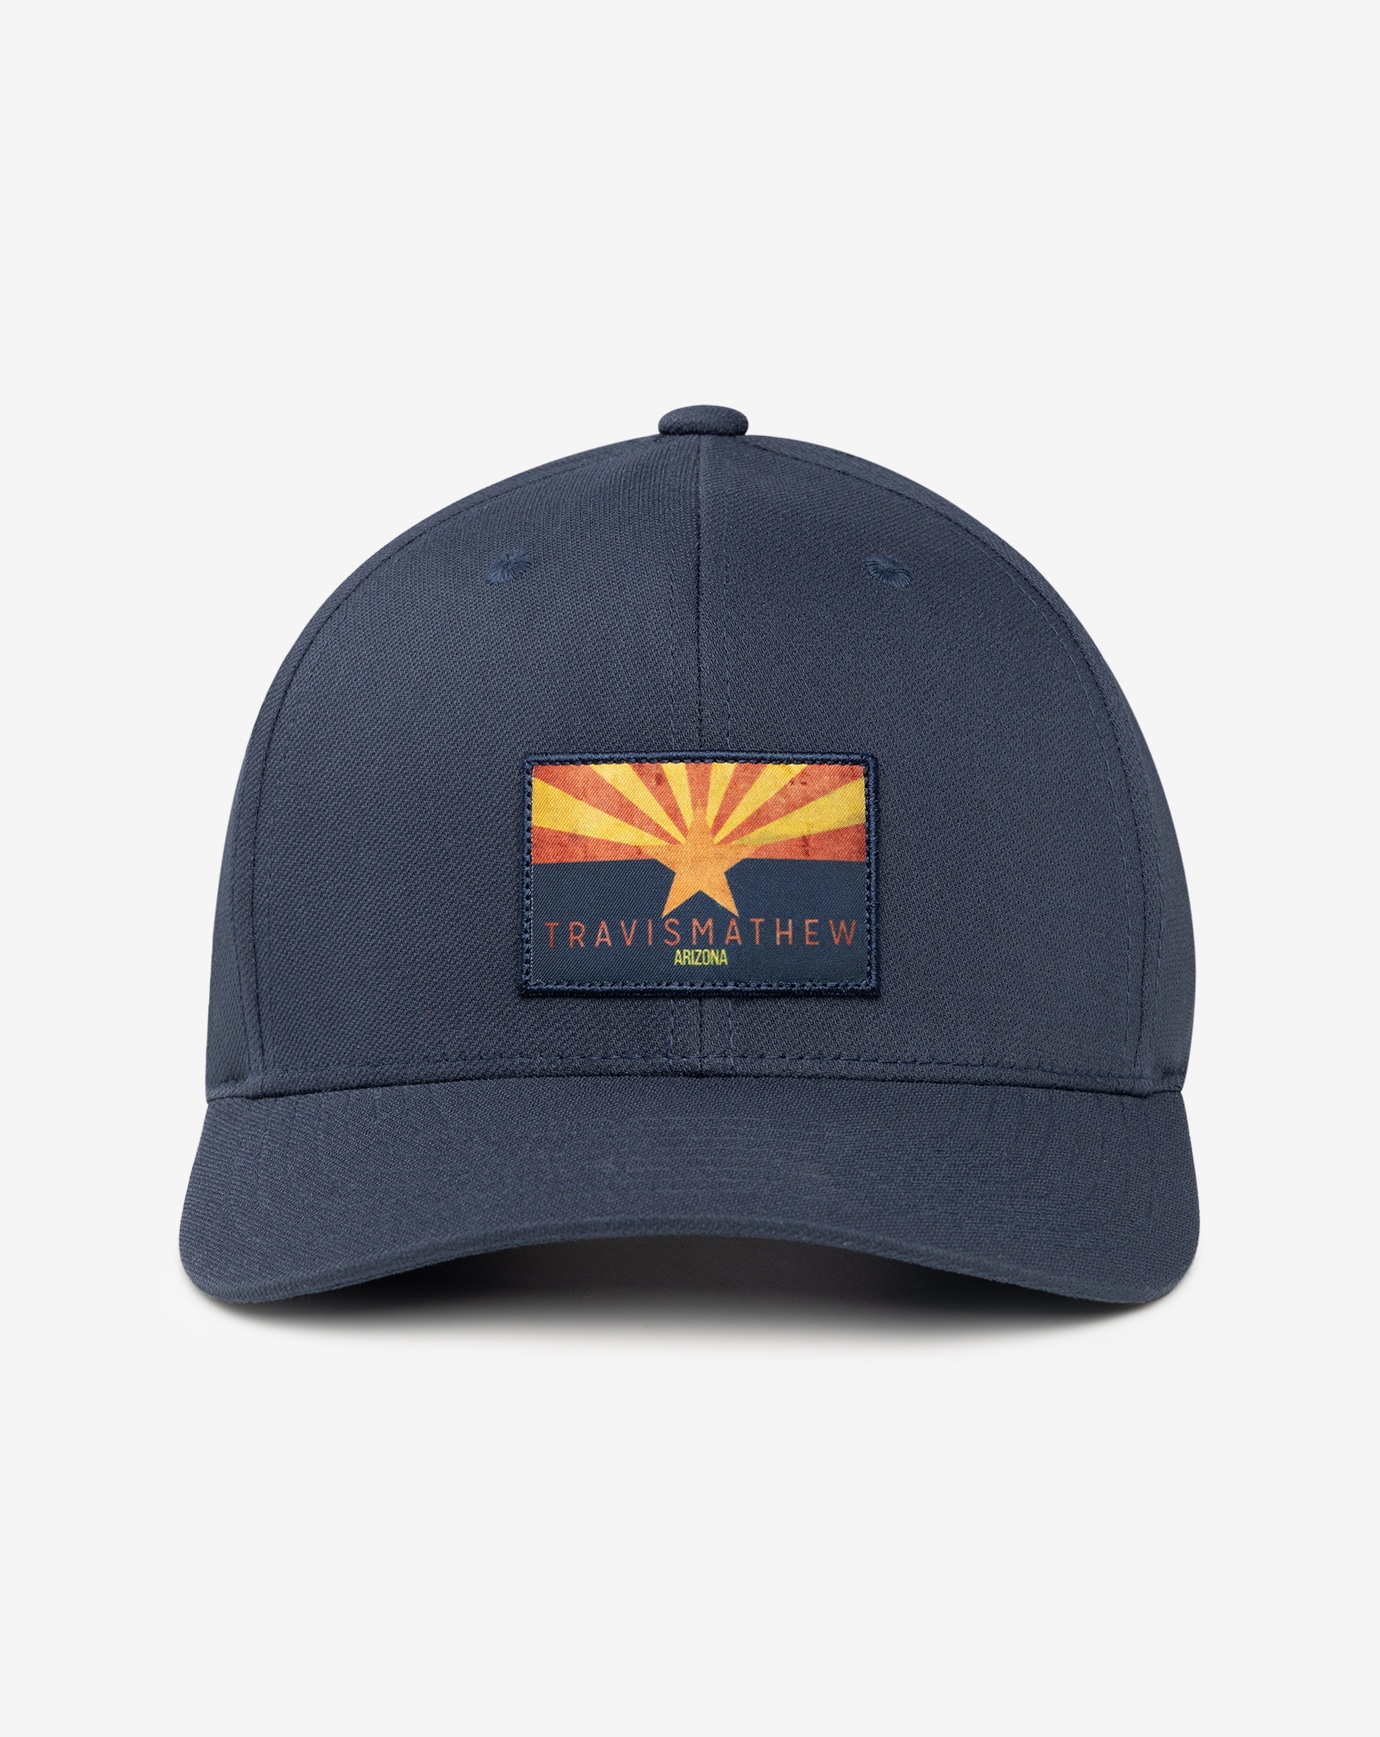 VALLEY OF THE SUN 2.0 SNAPBACK HAT Image Thumbnail 1